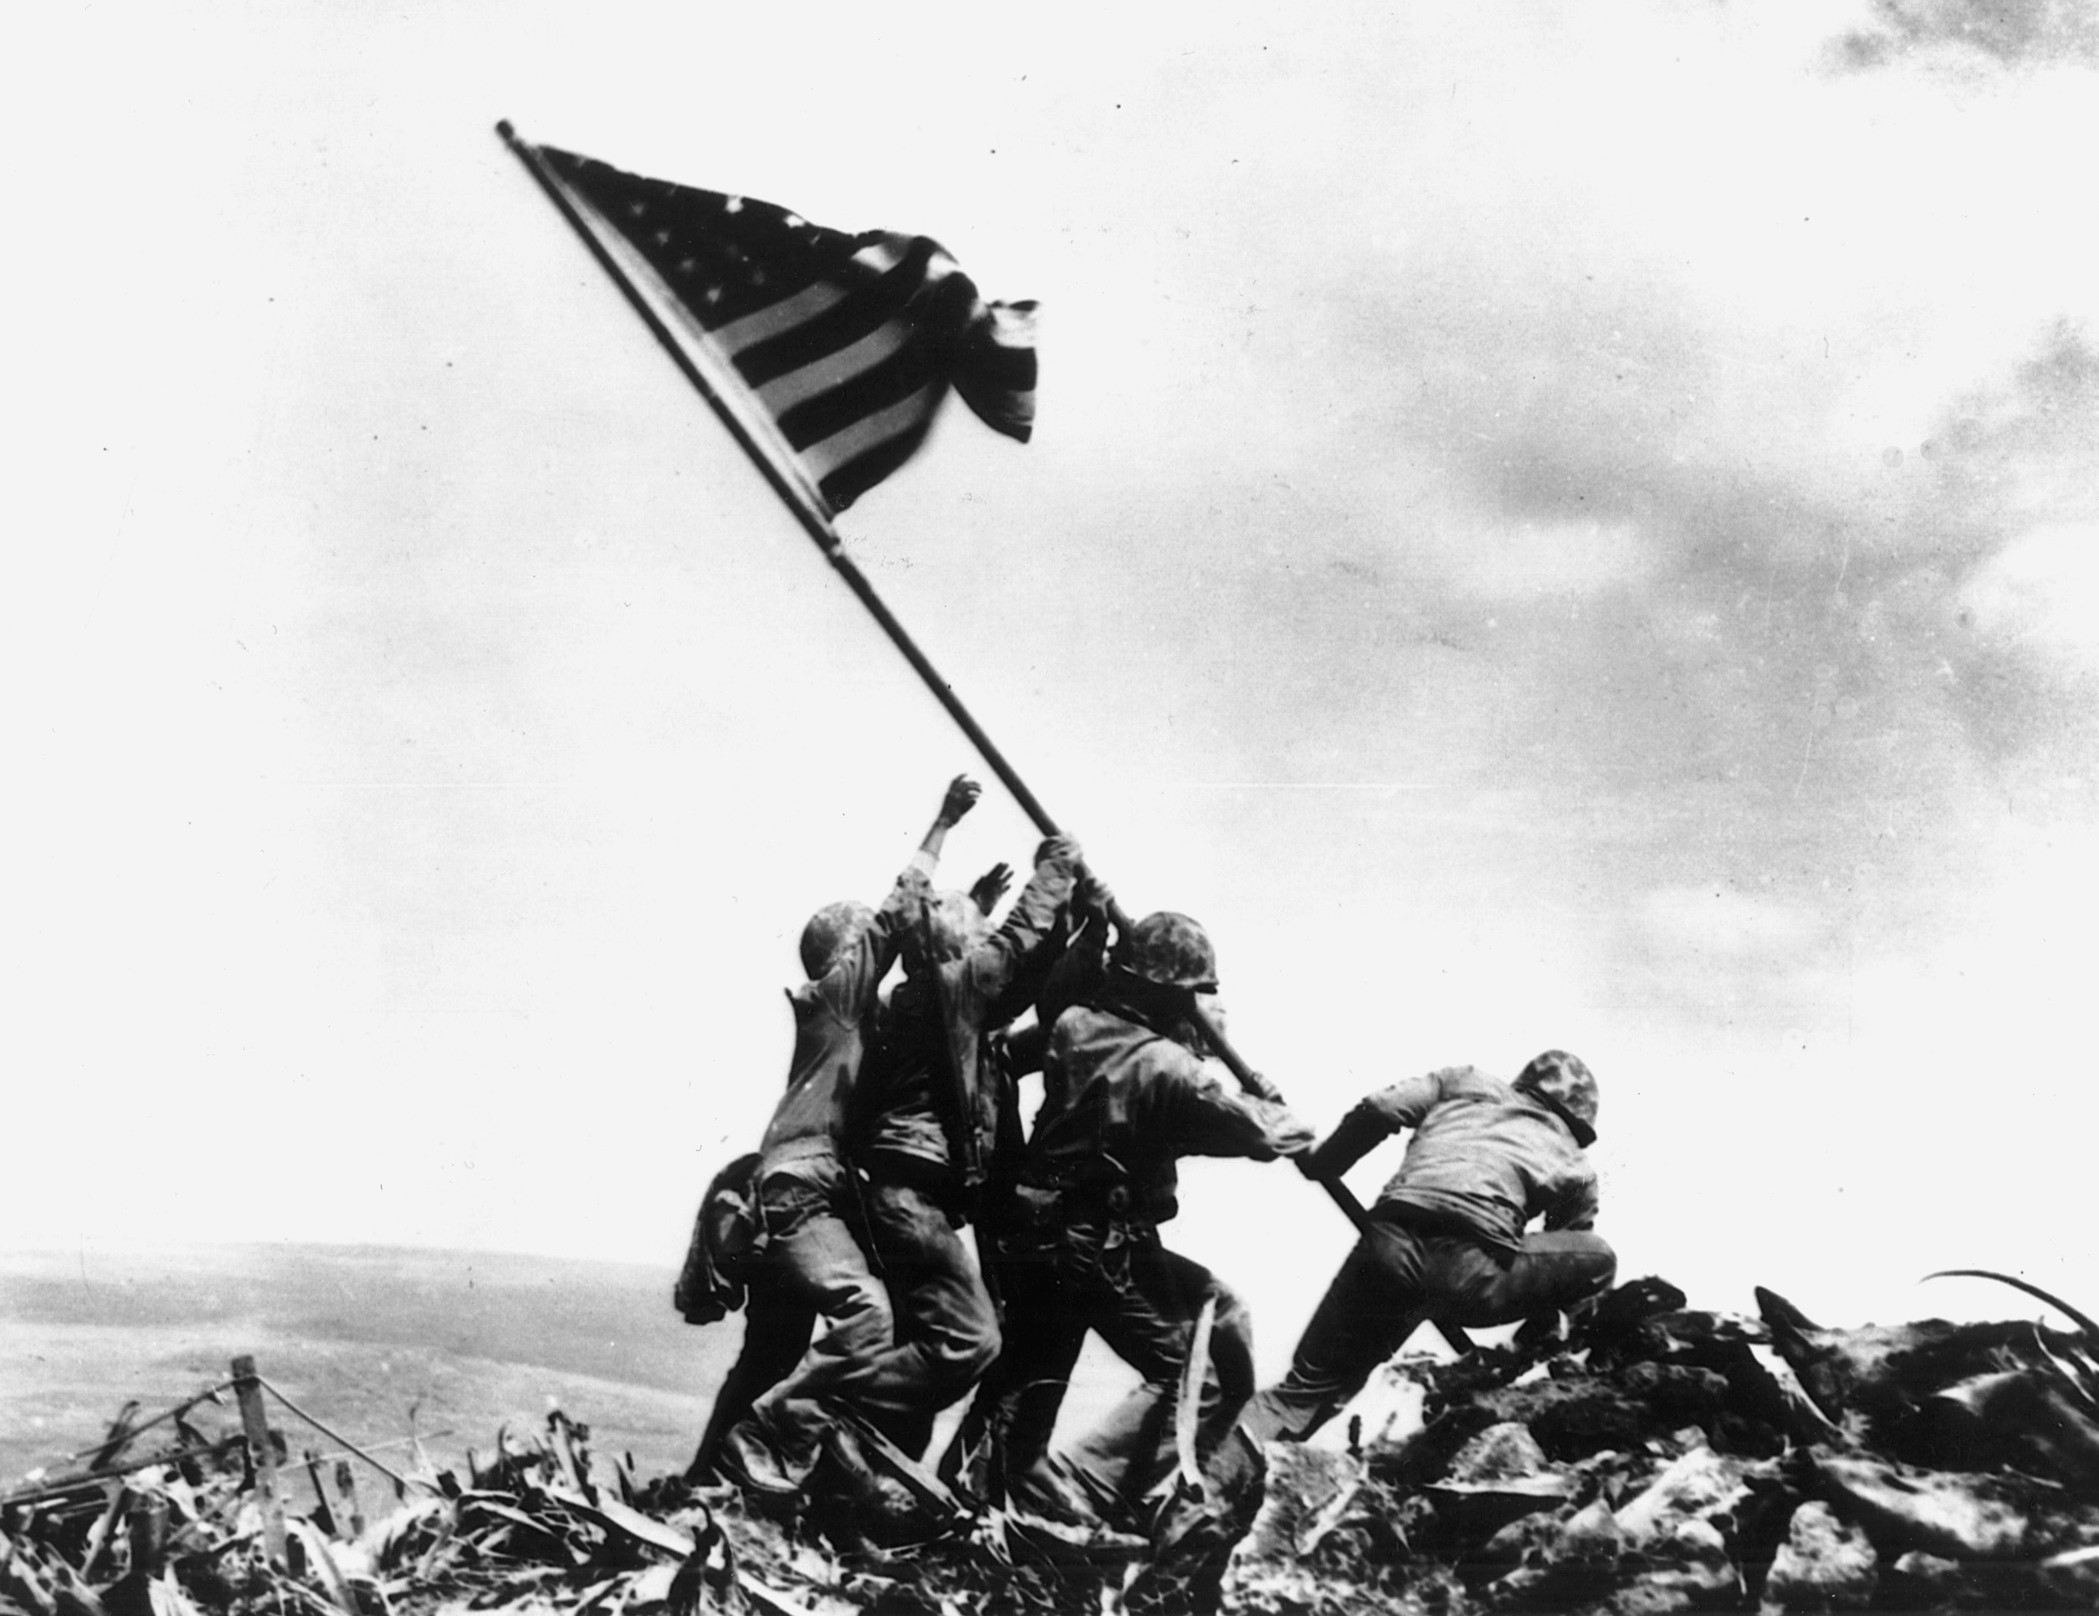 U.S. Marines raise the flag on Iwo Jima in Joe Rosenthal’s famous photograph in March 1945.